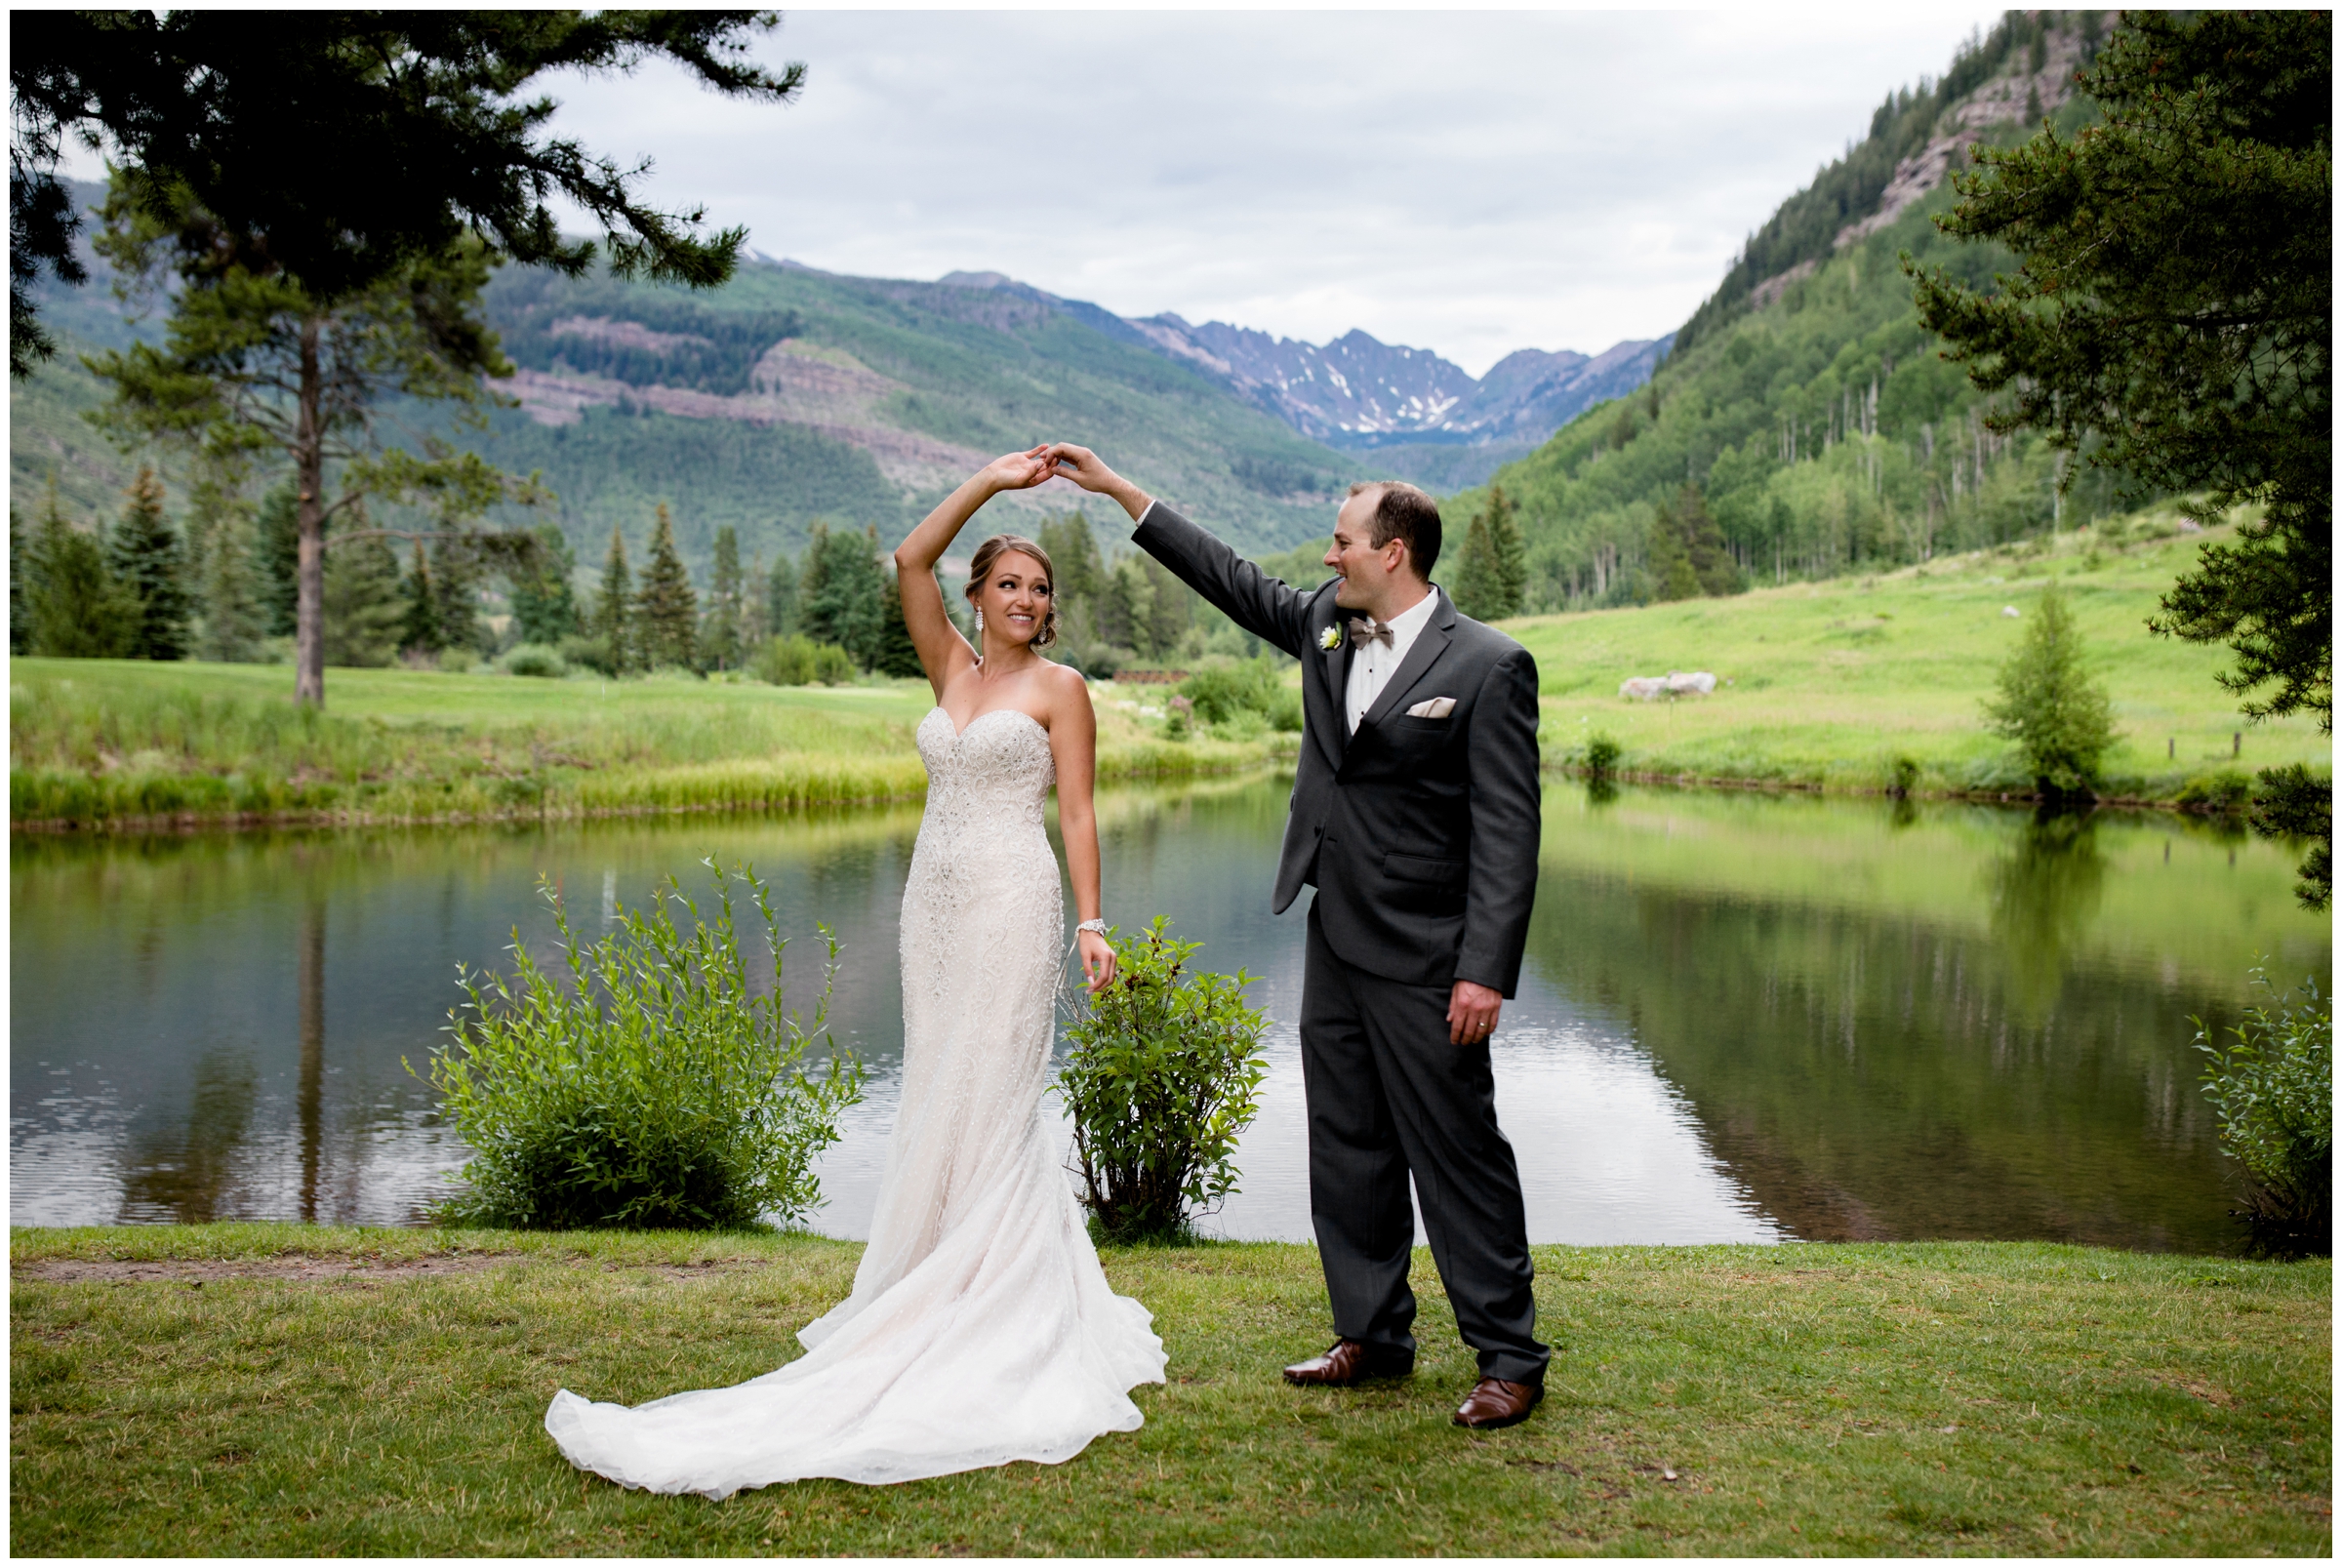 Vail golf club wedding inspiration in the Colorado mountains by Vail wedding photographer Plum Pretty Photography